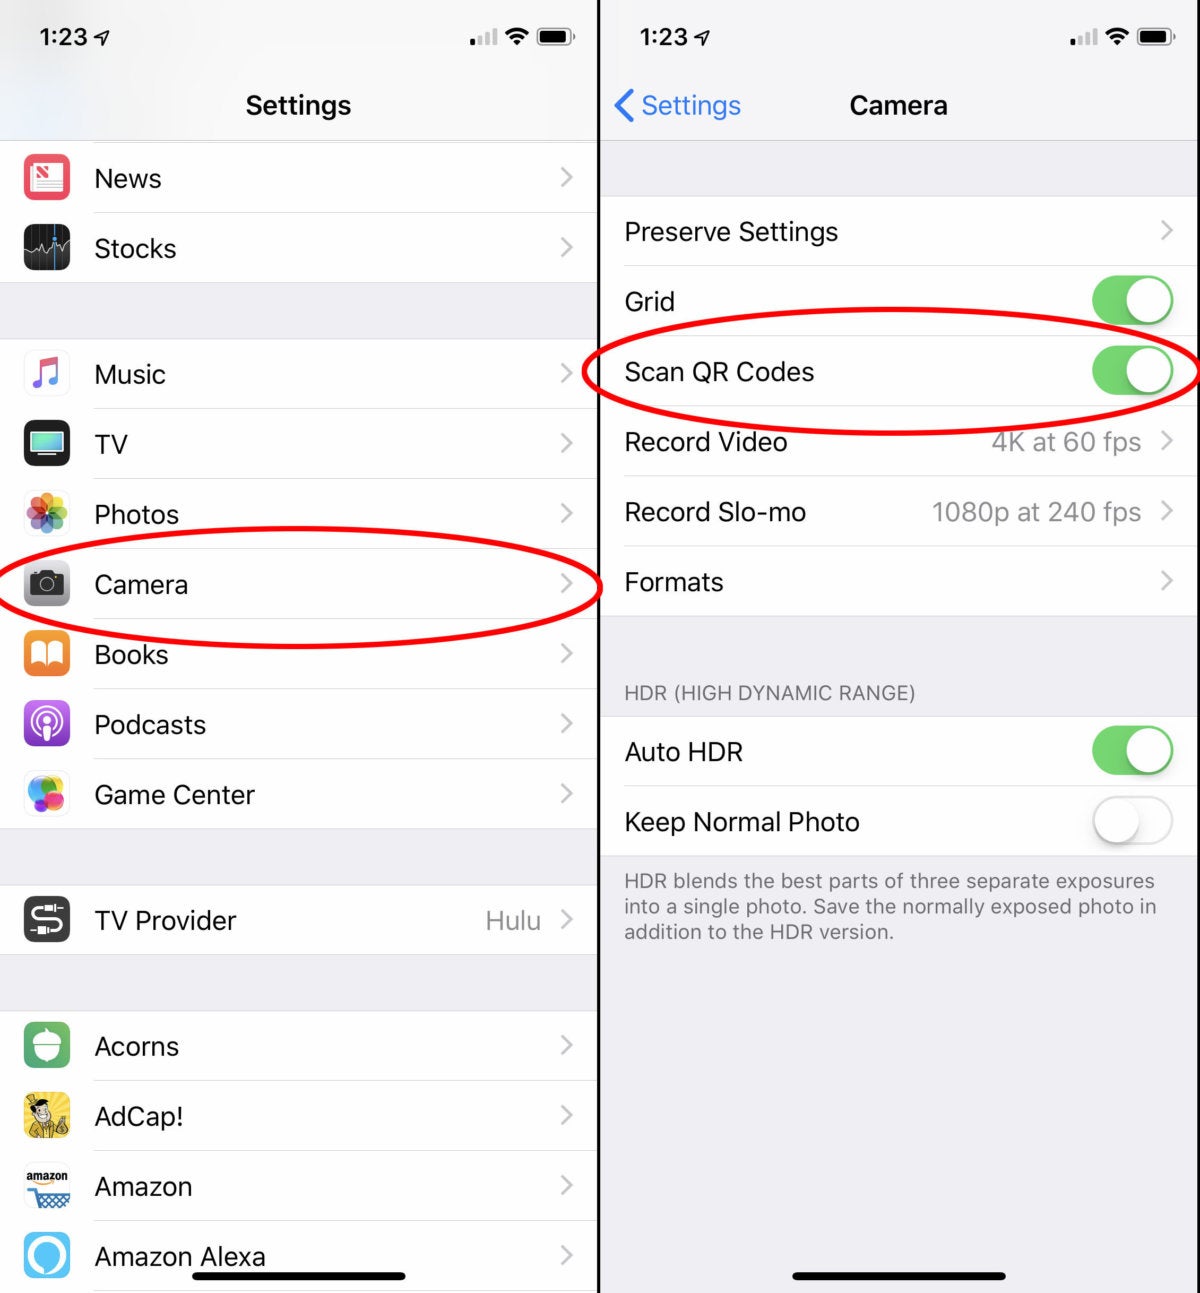 How to scan QR codes with your iPhone or iPad | Macworld